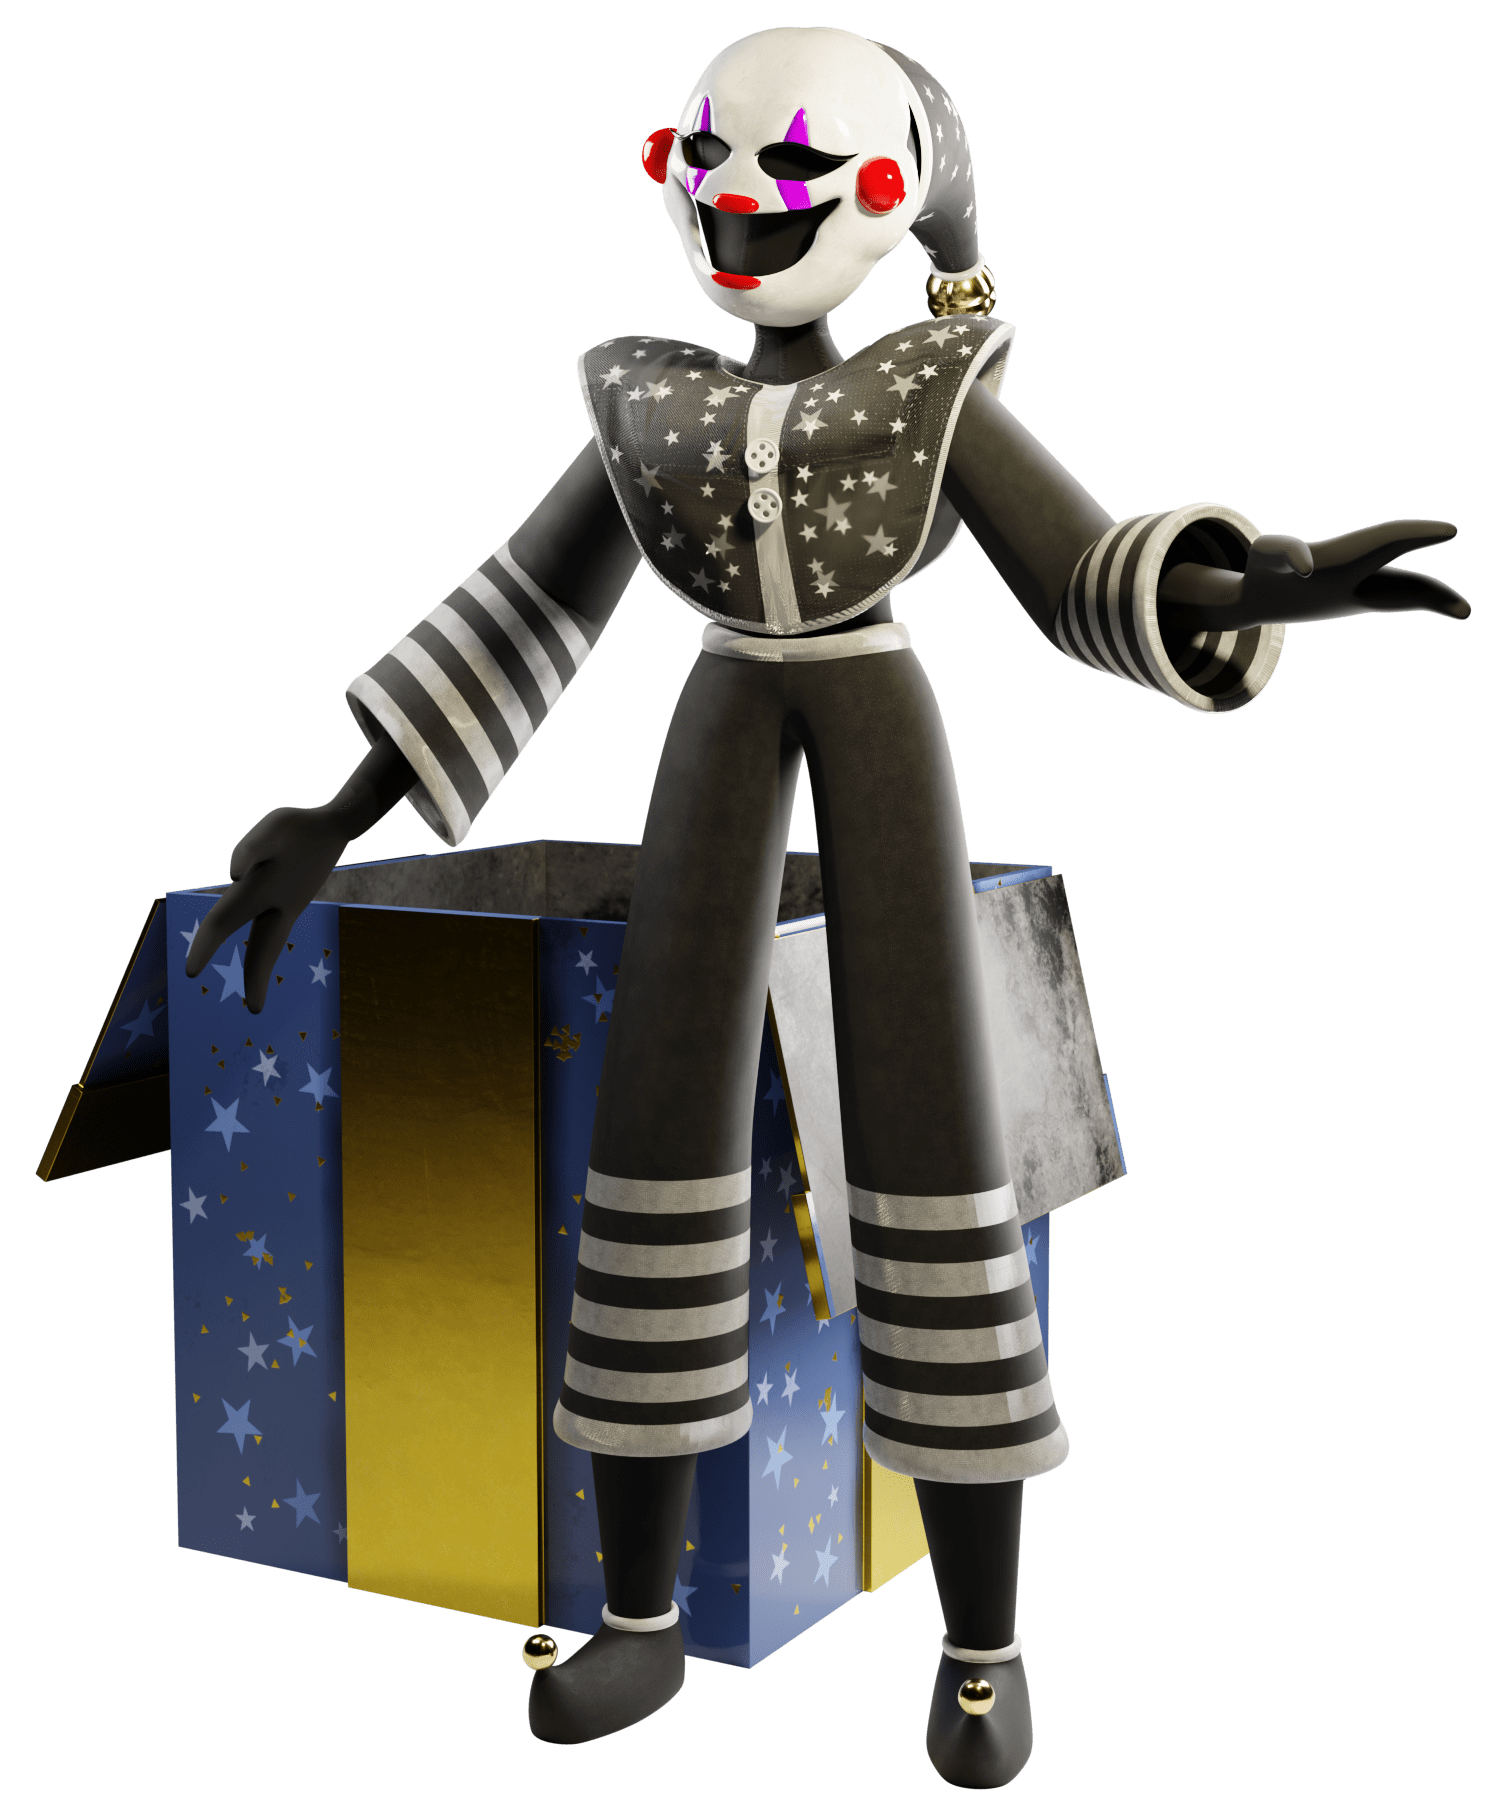 marionette costume five nights at freddys